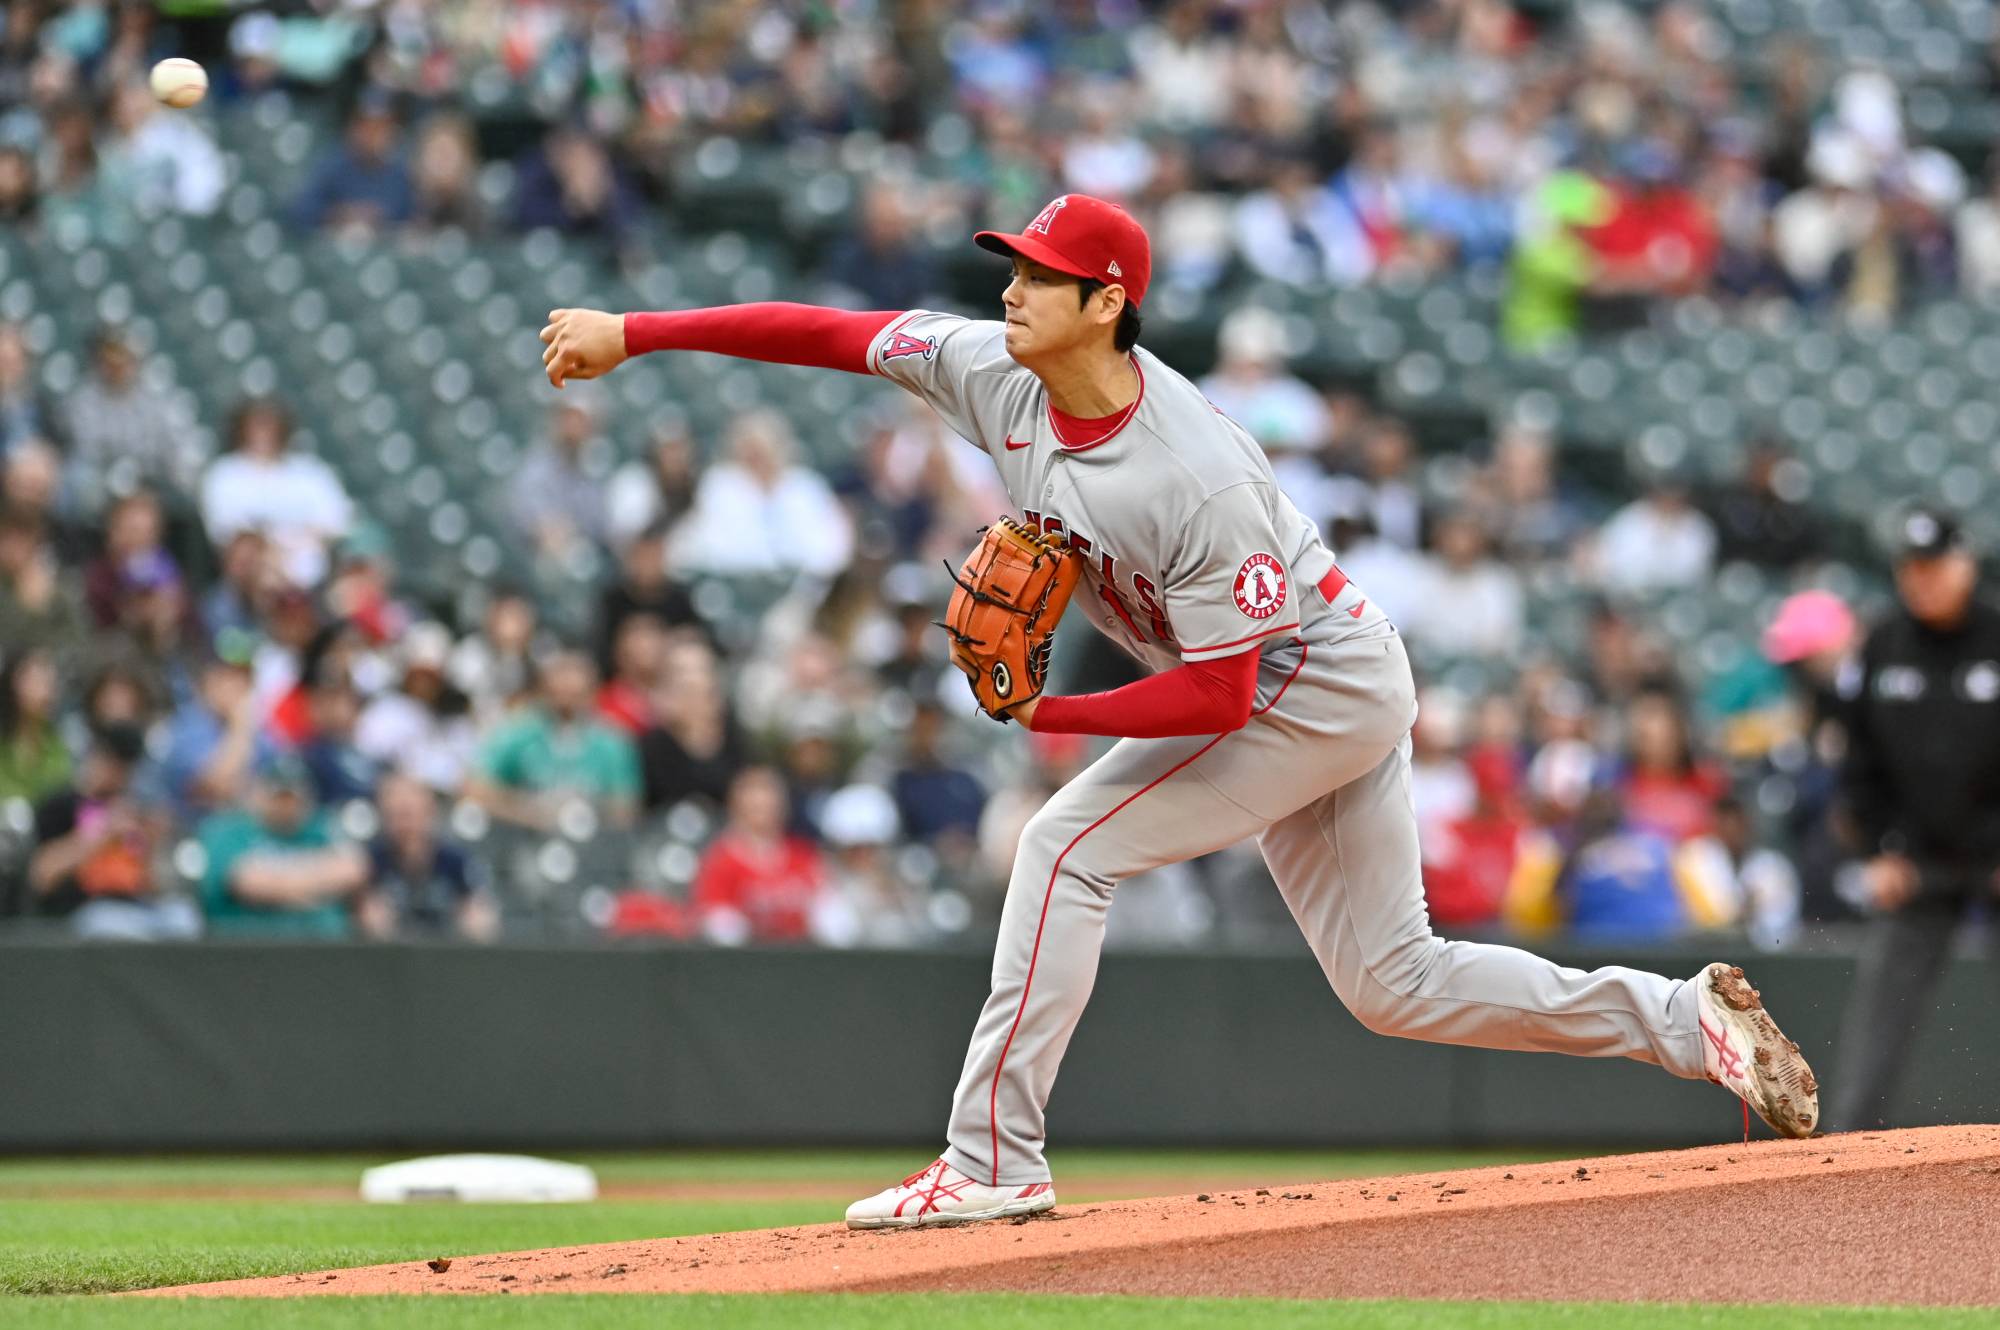 Angels starter Shohei Ohtani pitches against the Mariners in Seattle on Thursday. | USA TODAY / VIA REUTERS